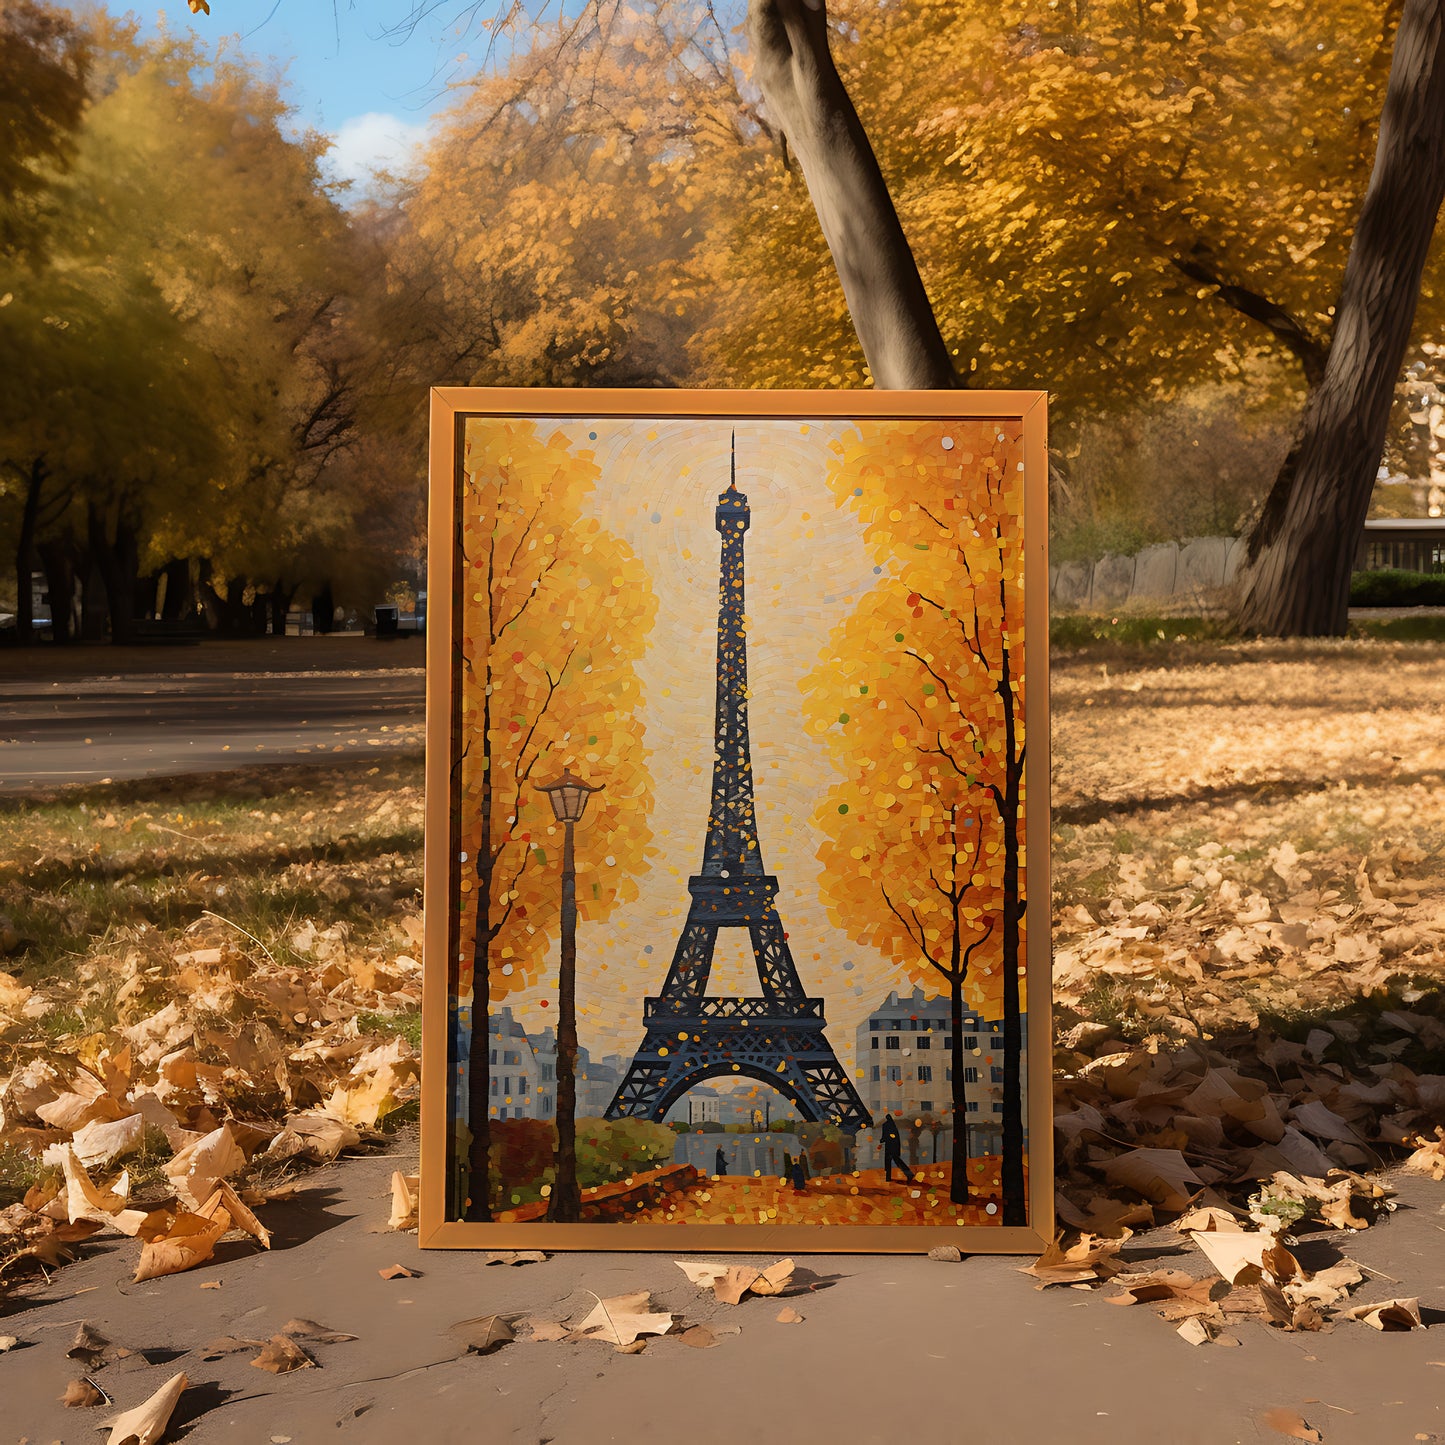 A painting of the Eiffel Tower in autumn displayed outdoors surrounded by fallen leaves.